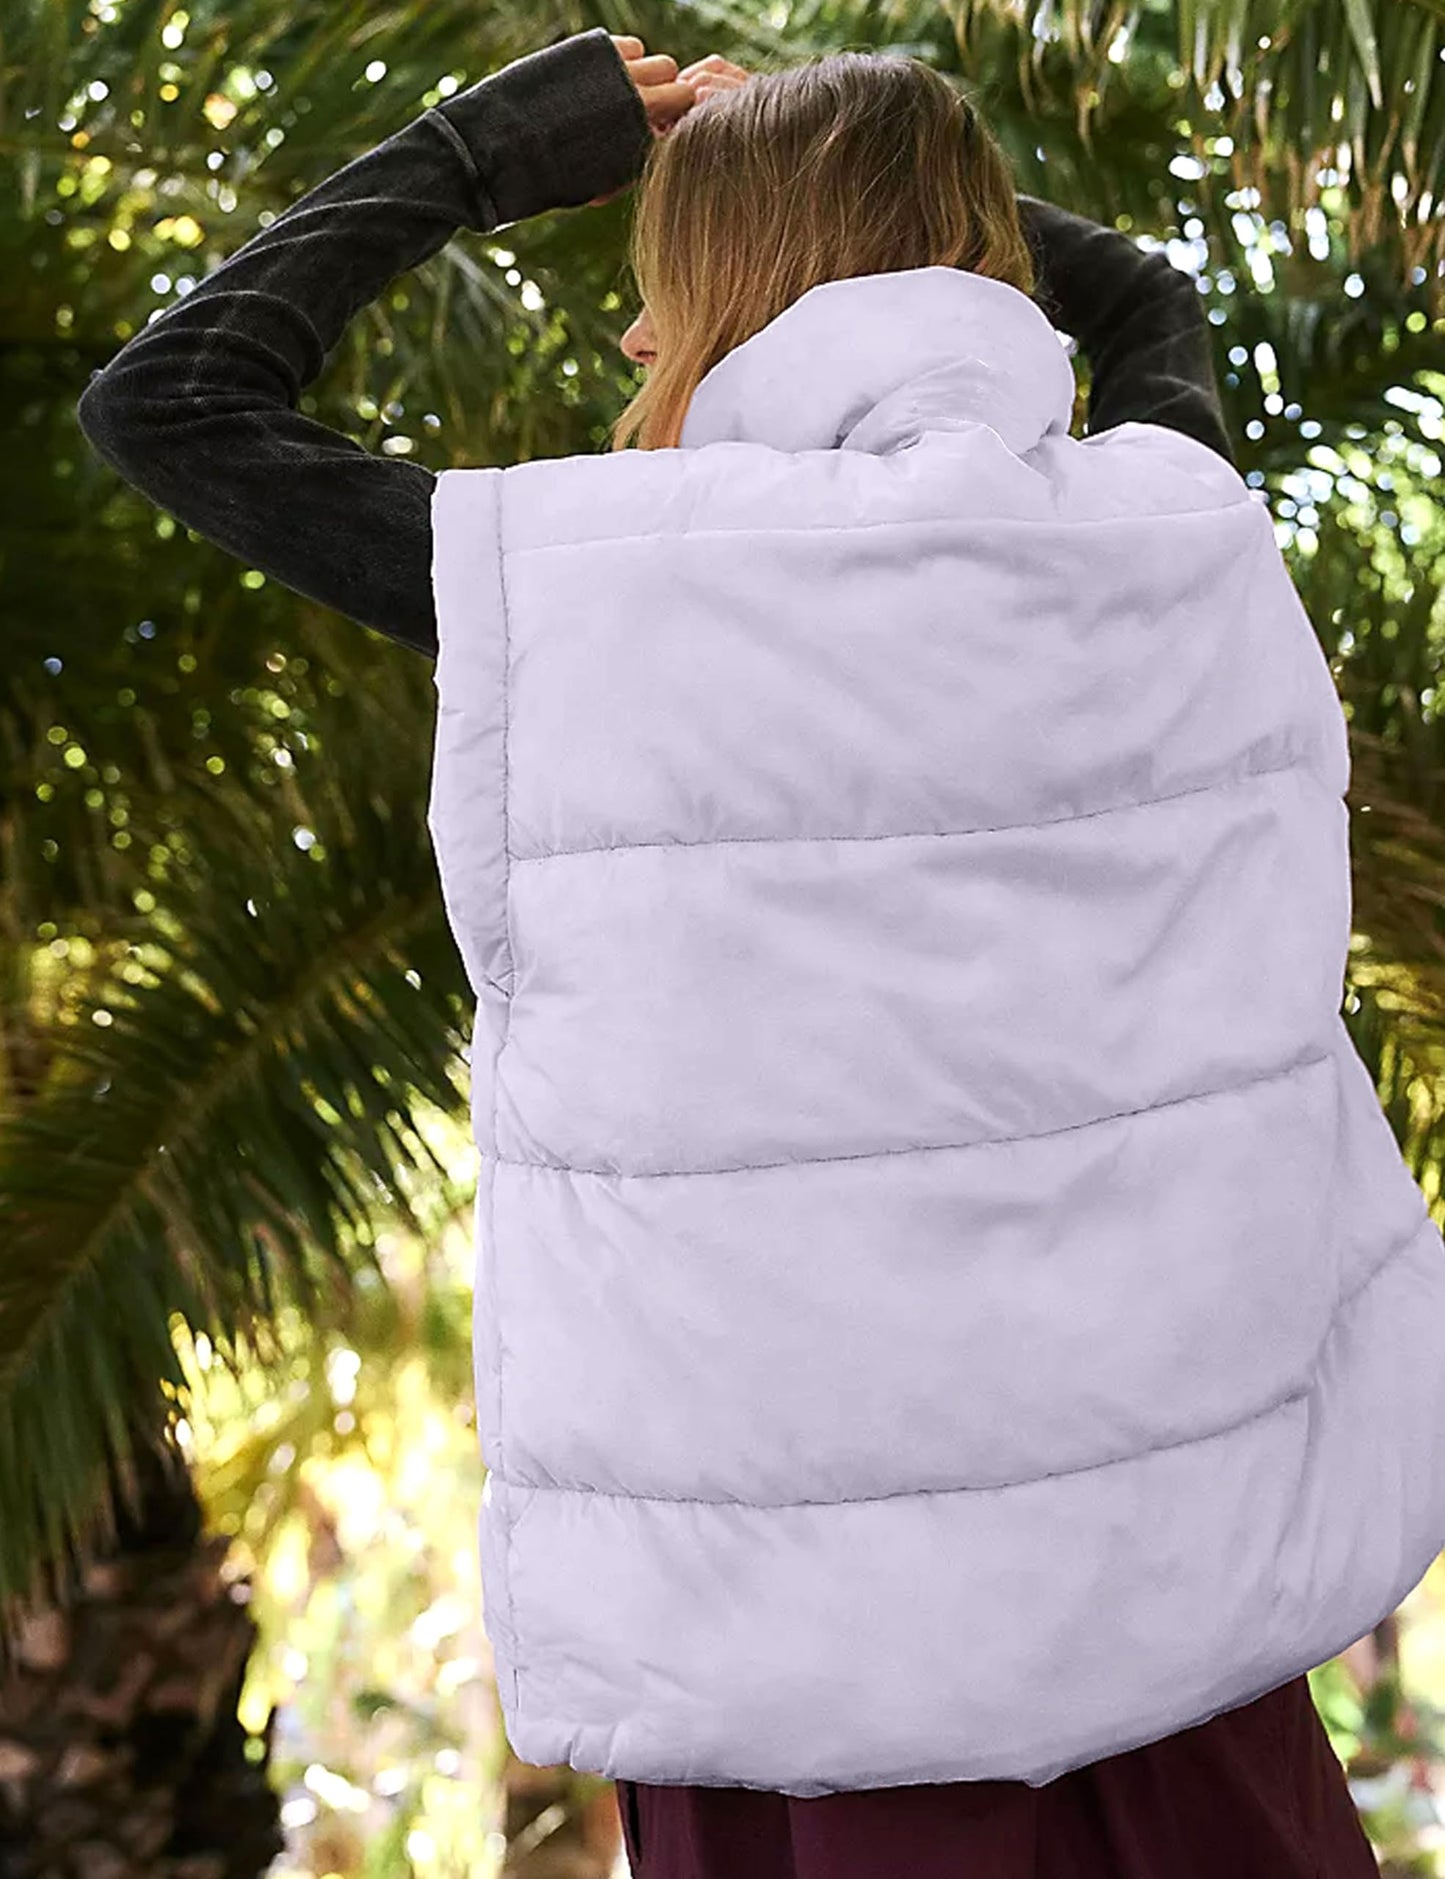 Apafes Oversized Winter Vest with Fly Sleeve